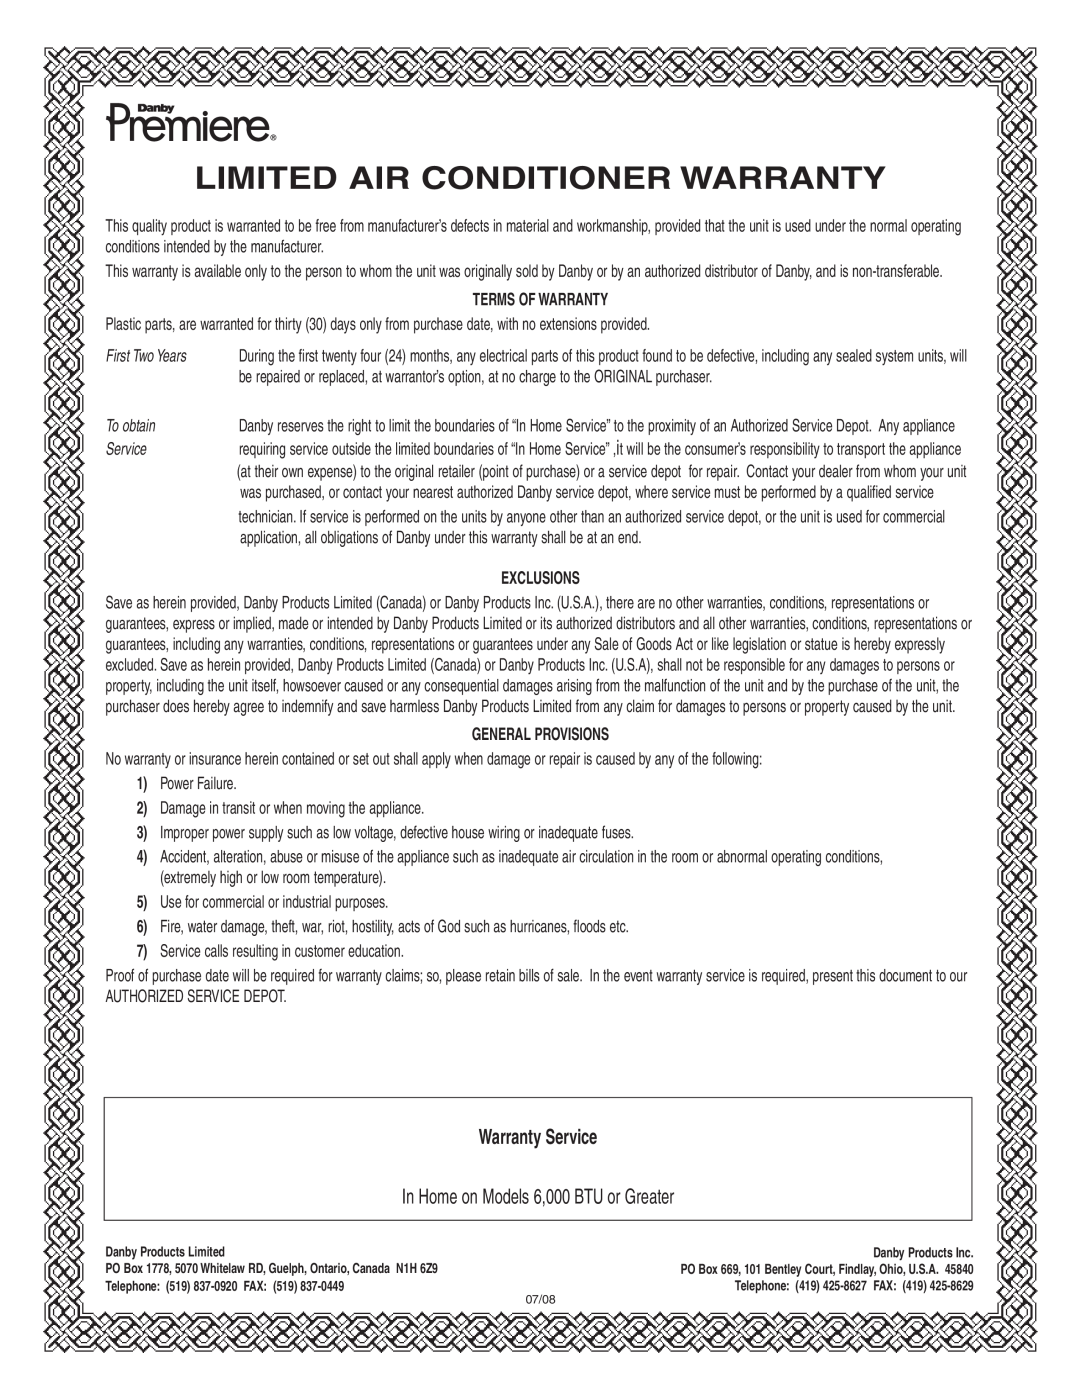 Danby DPAC 12099 Limited Air Conditioner Warranty, Warranty Service, In Home on Models 6,000 BTU or Greater, To obtain 